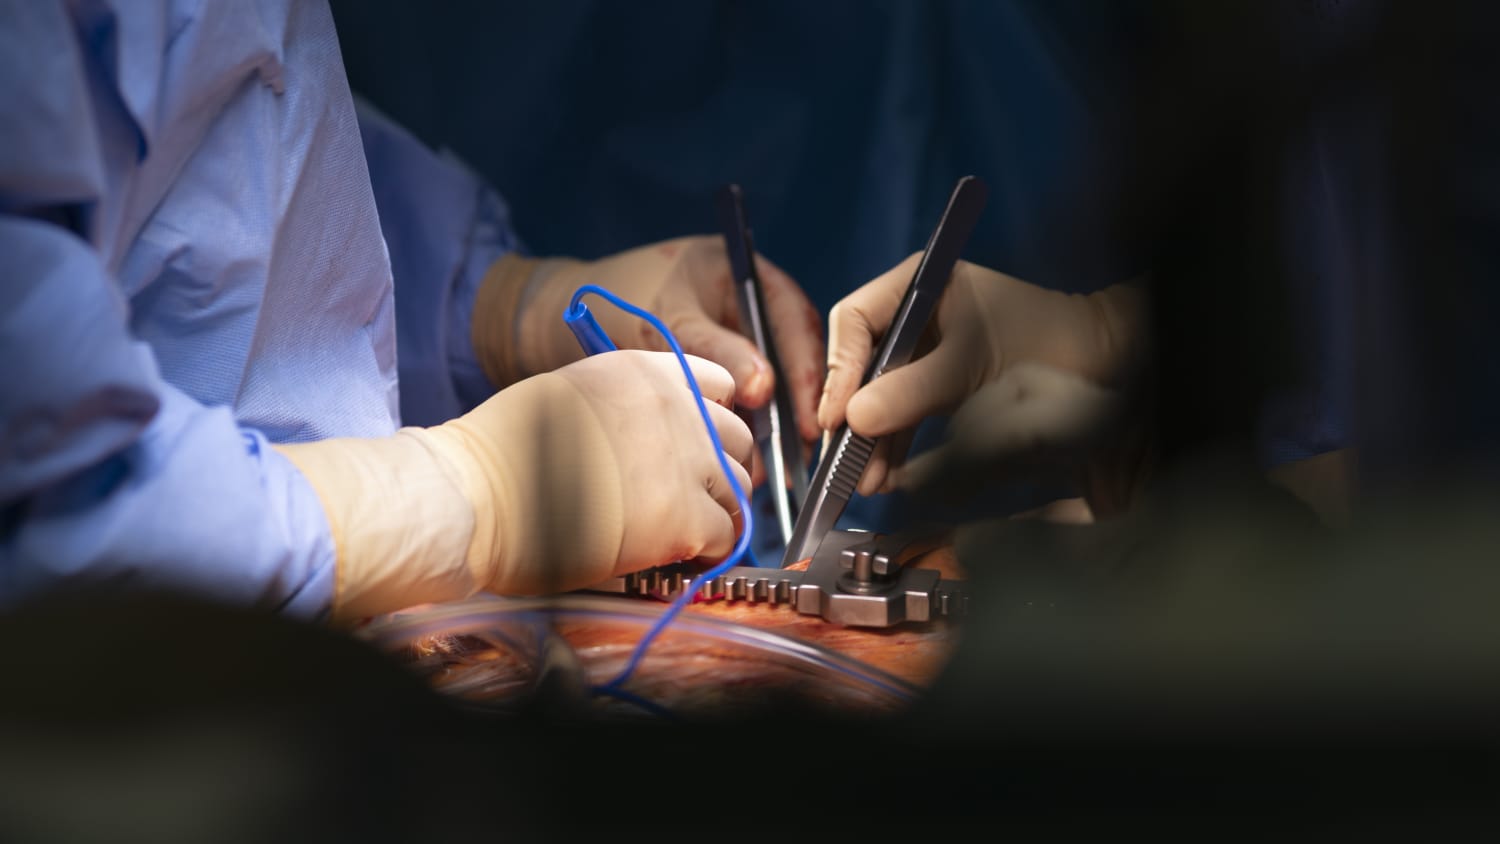 surgeons completing Reoperative Heart Surgery